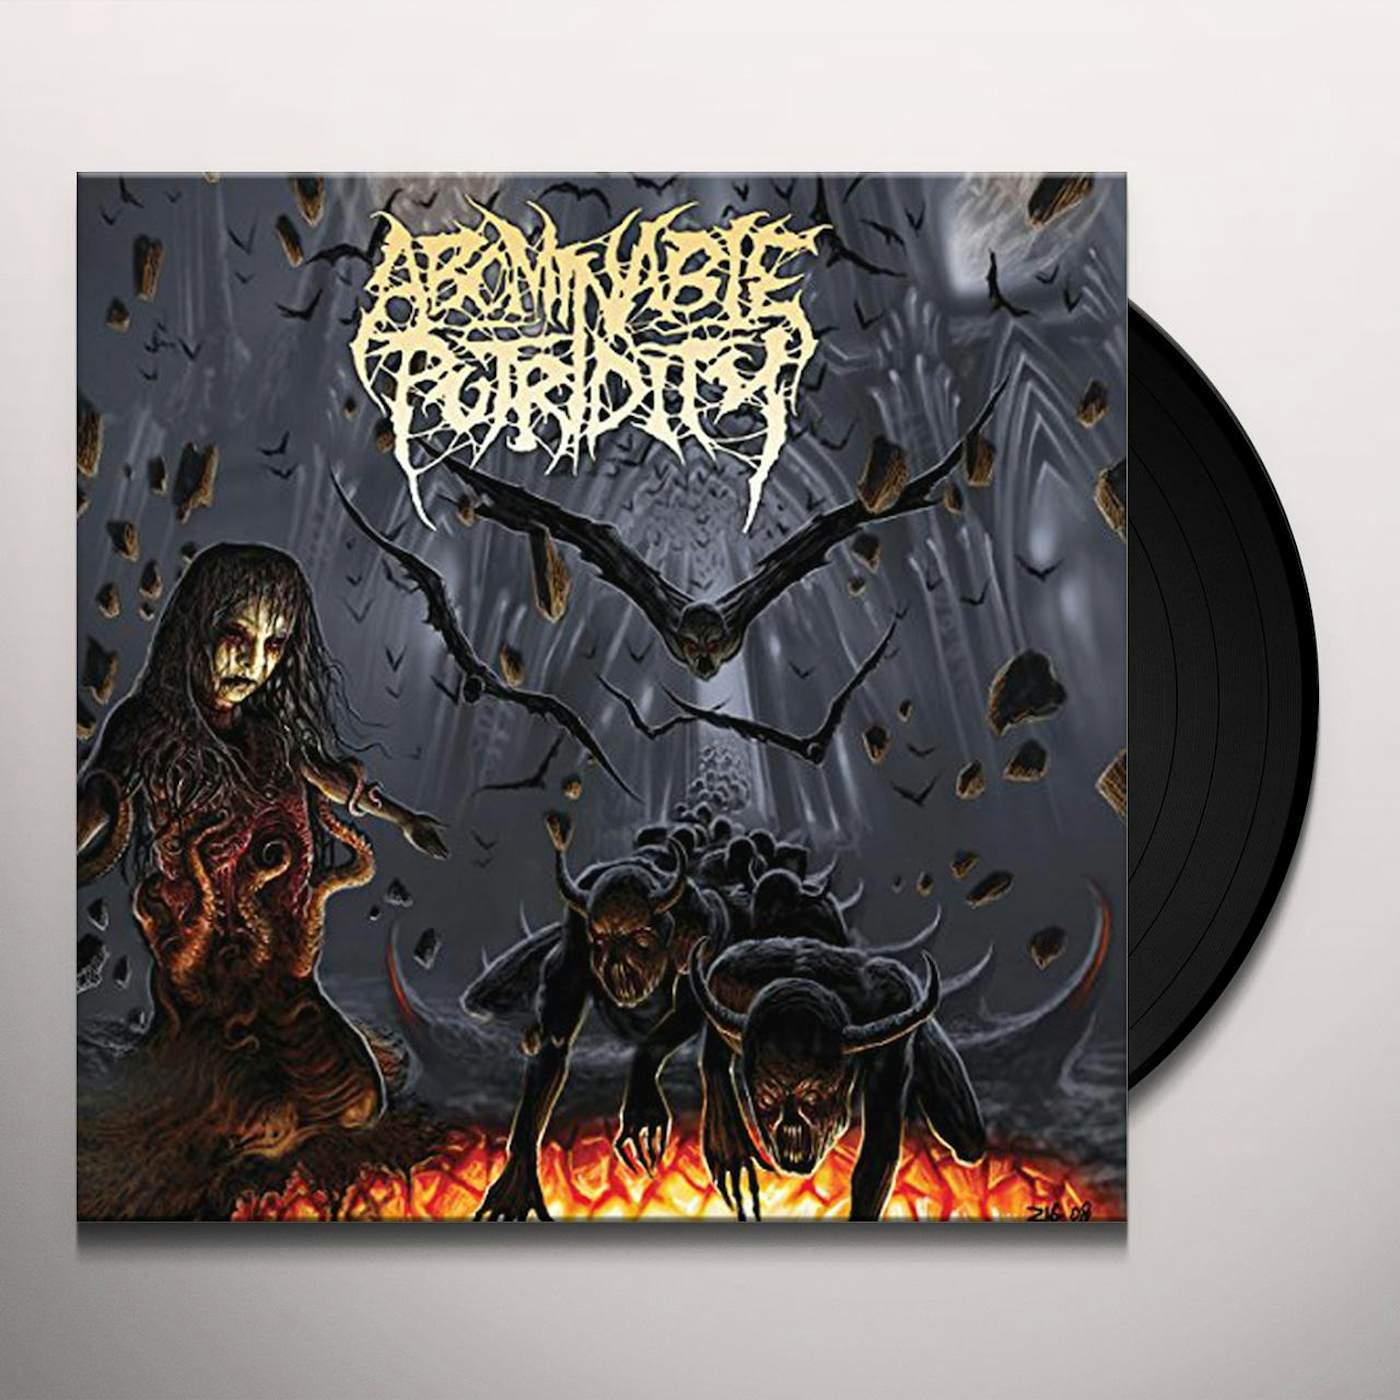 Abominable Putridity In the End of Human Existence Vinyl Record